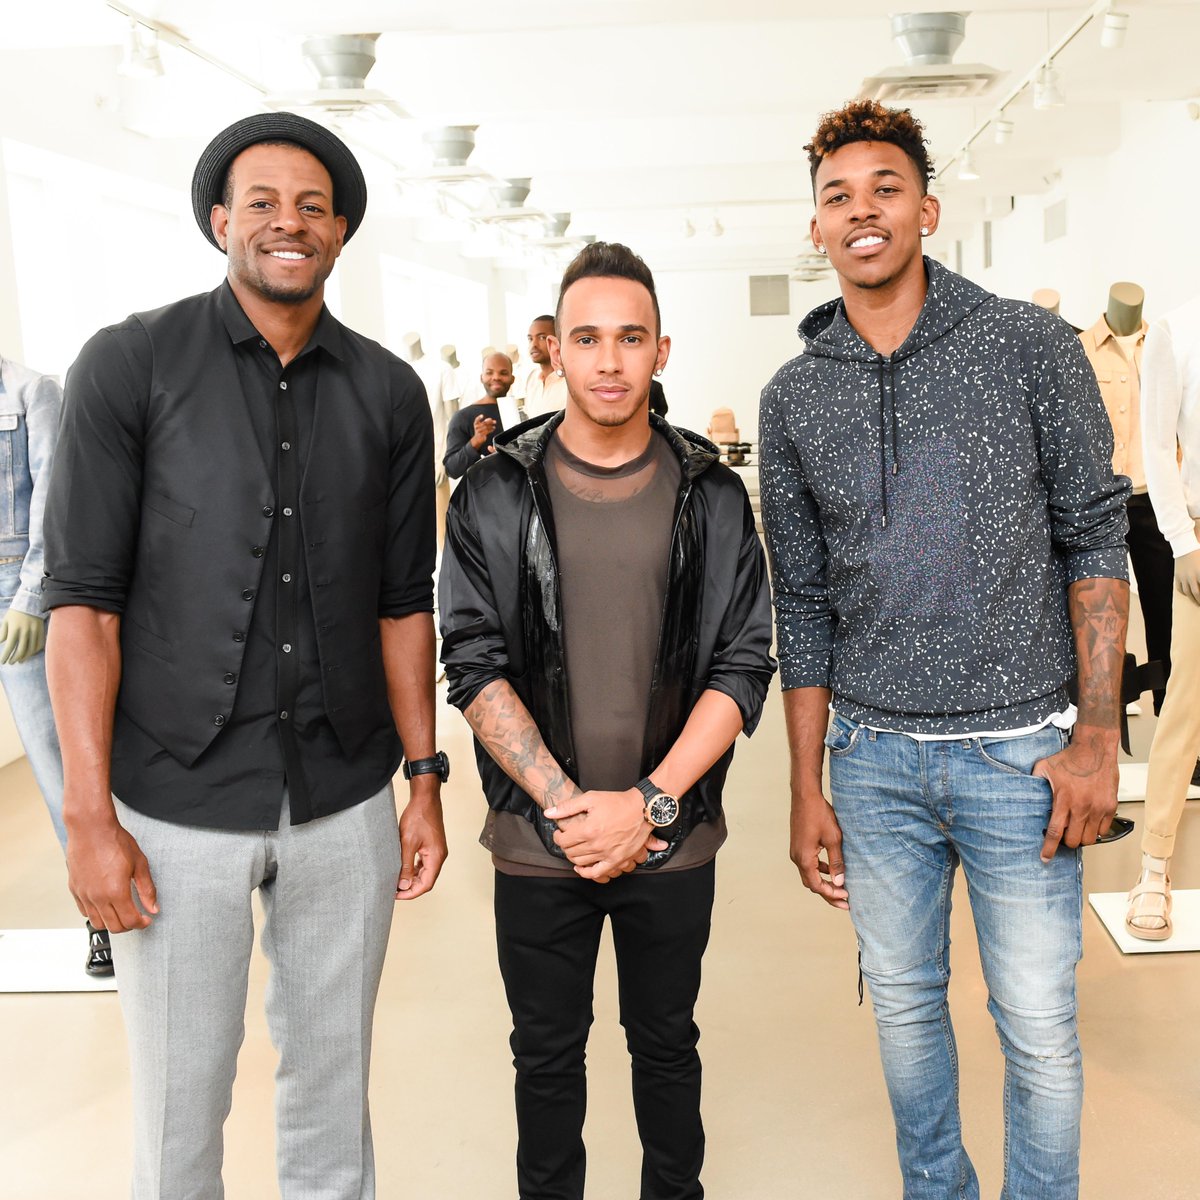 Verhandeling licht kan zijn Lewis Hamilton Pictures on Twitter: "Andre Iguodala, Lewis Hamilton, Nick  Young at Calvin Klein Fashion Show in New York http://t.co/crWqpPfZhB  http://t.co/KEUQOMKRyi" / Twitter